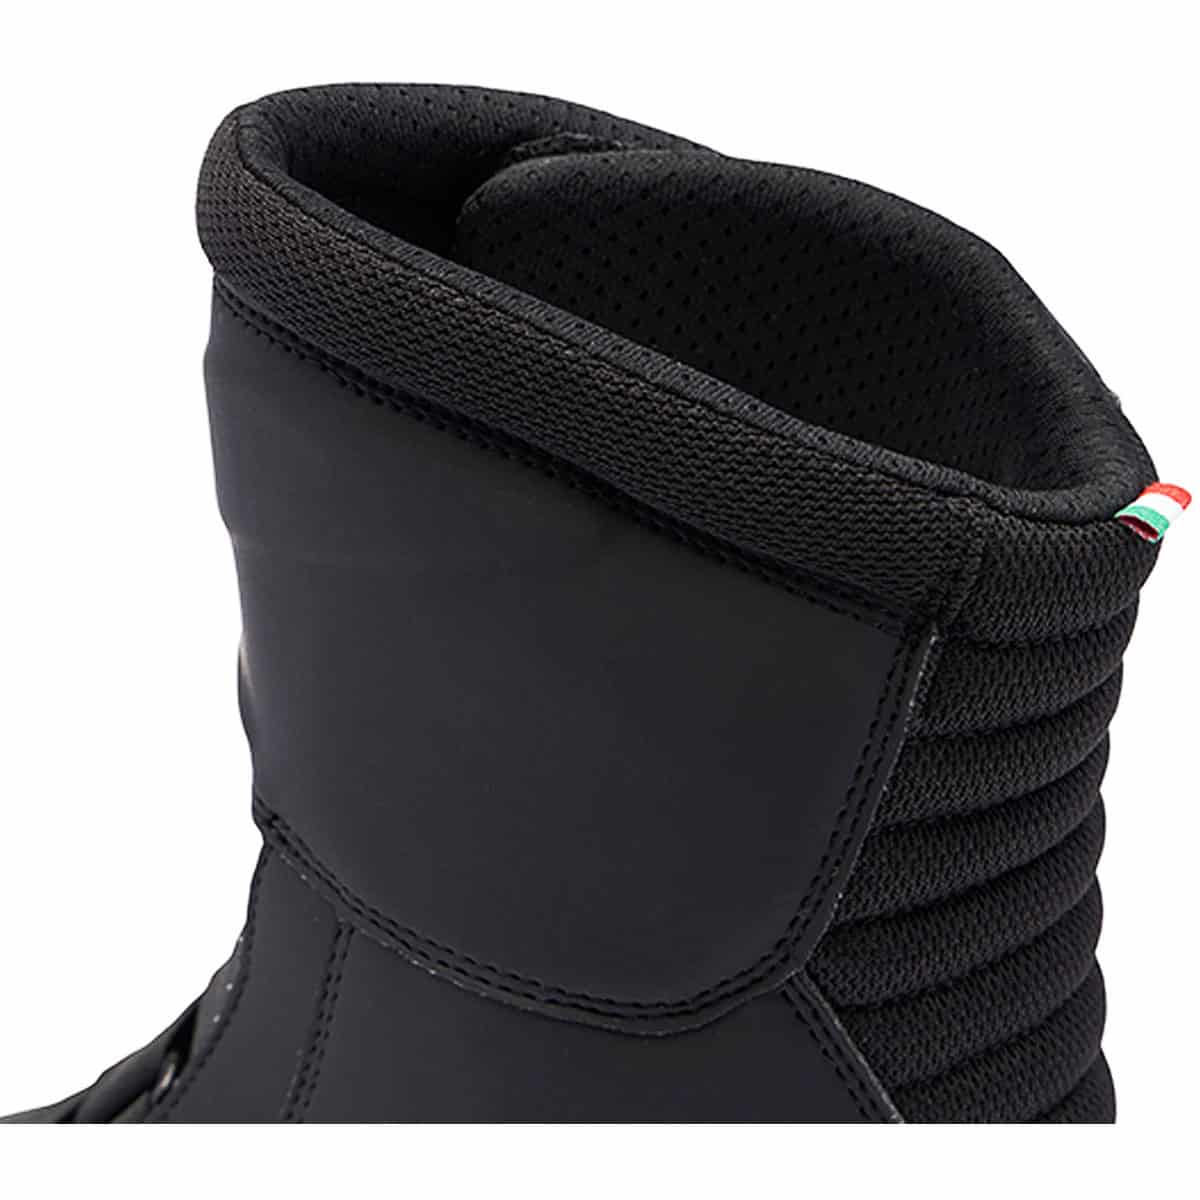 TCX Touring Boots with innovative lacing closure for perfect fit - opening